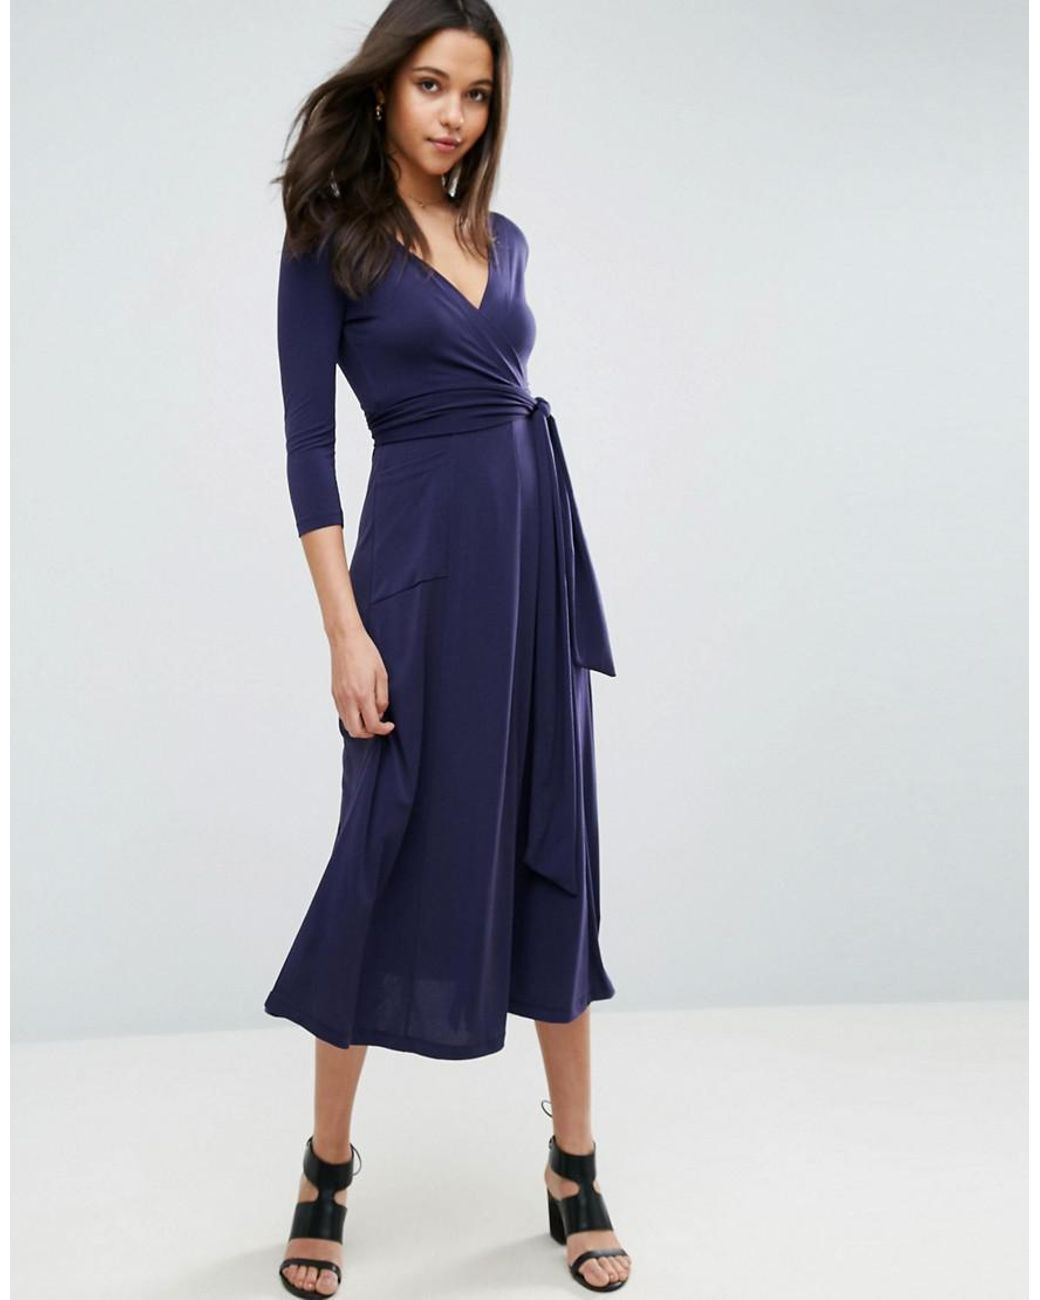 ASOS Synthetic Crepe Wrap Midi Dress in Navy (Blue) | Lyst